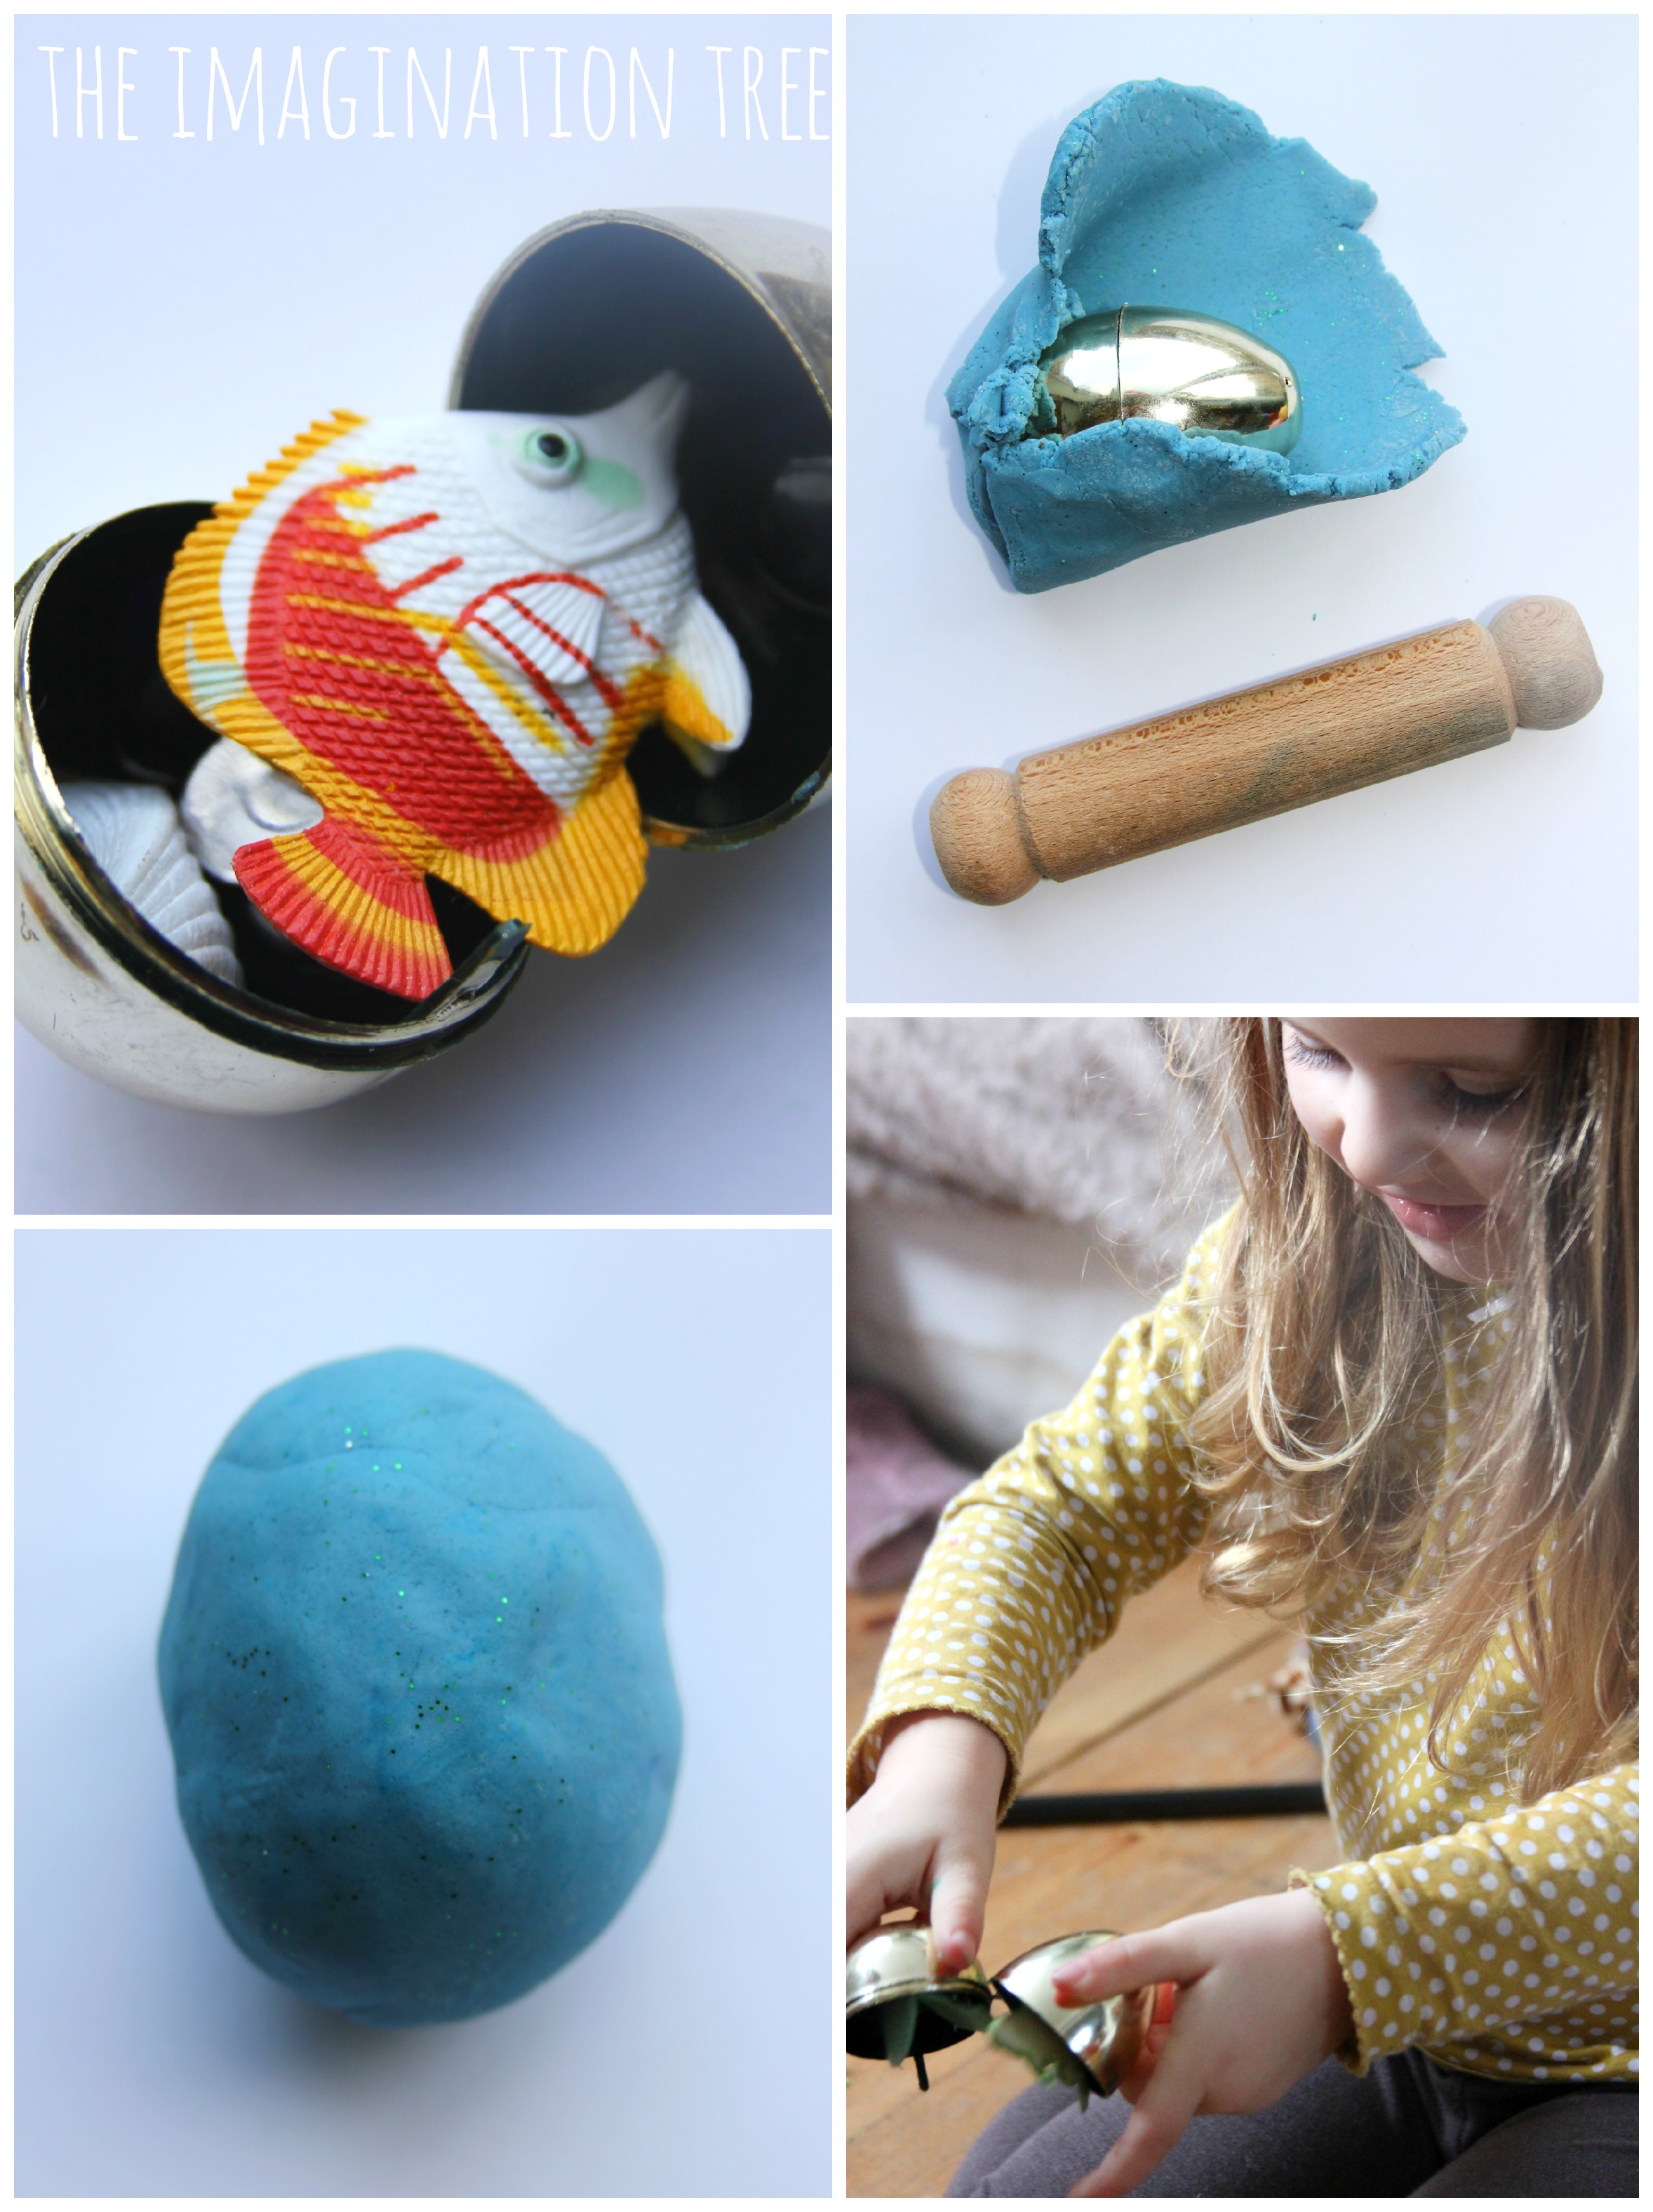 How to make surprise eggs with homemade play dough